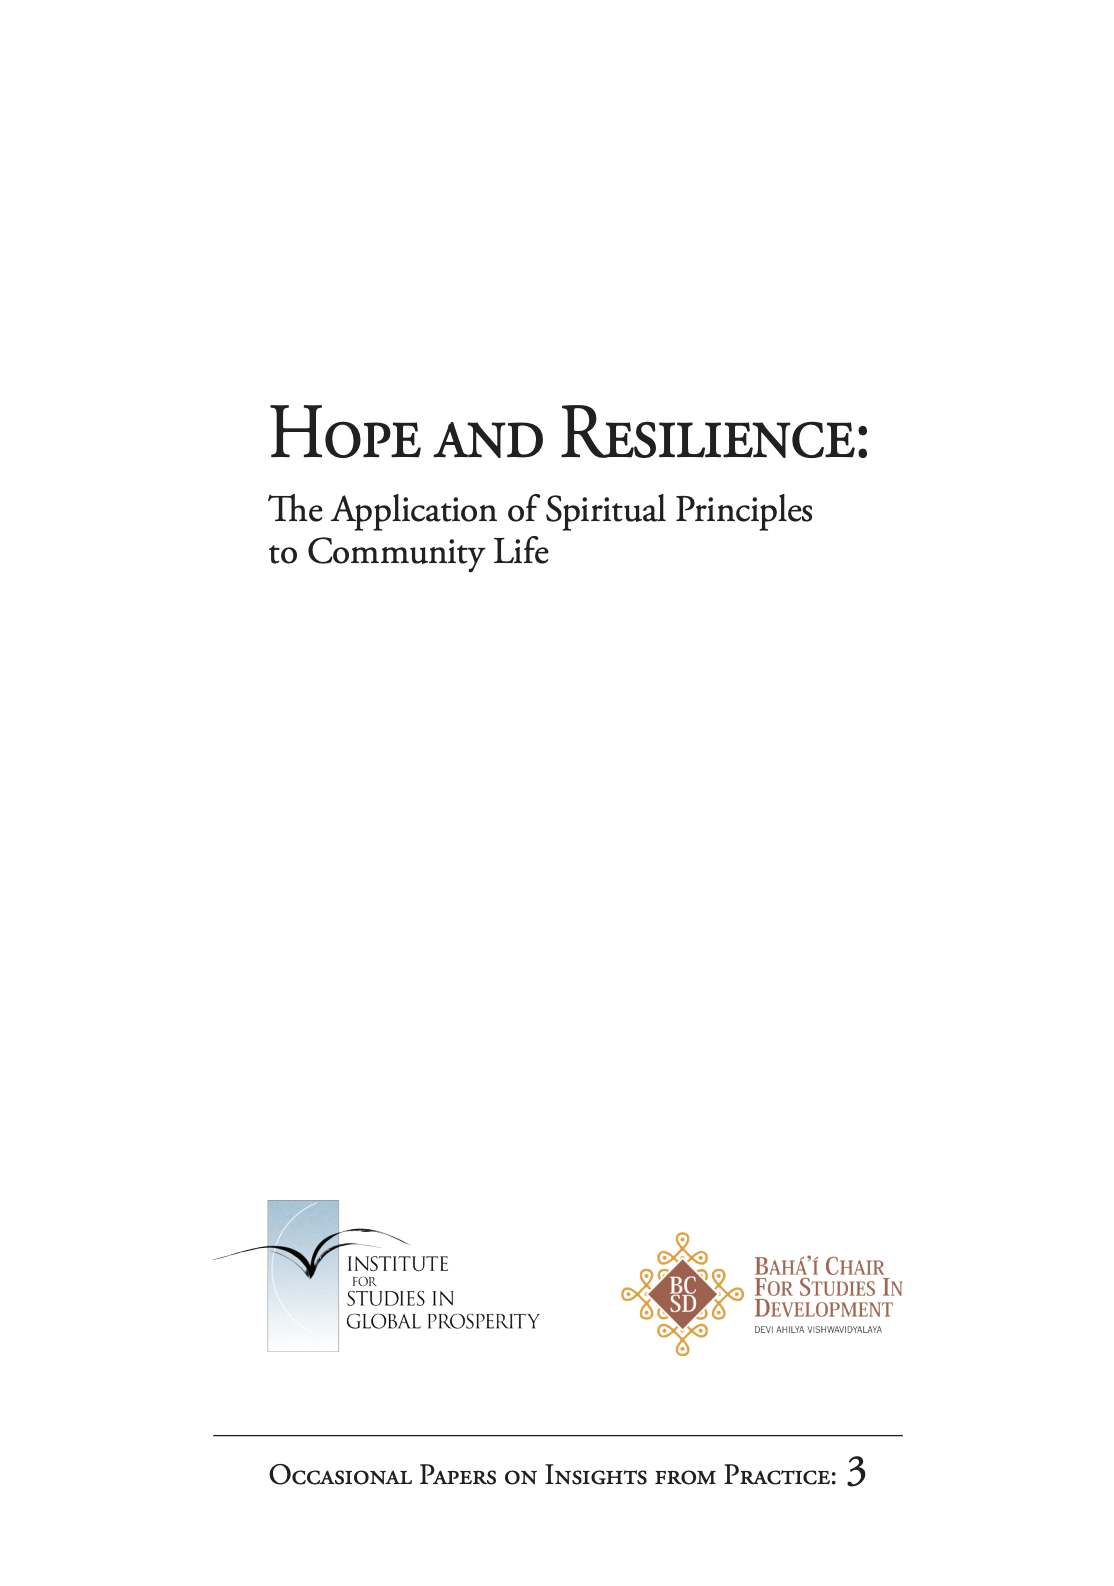 Hope and Resilience: The Application of Spiritual Principles to Community Life